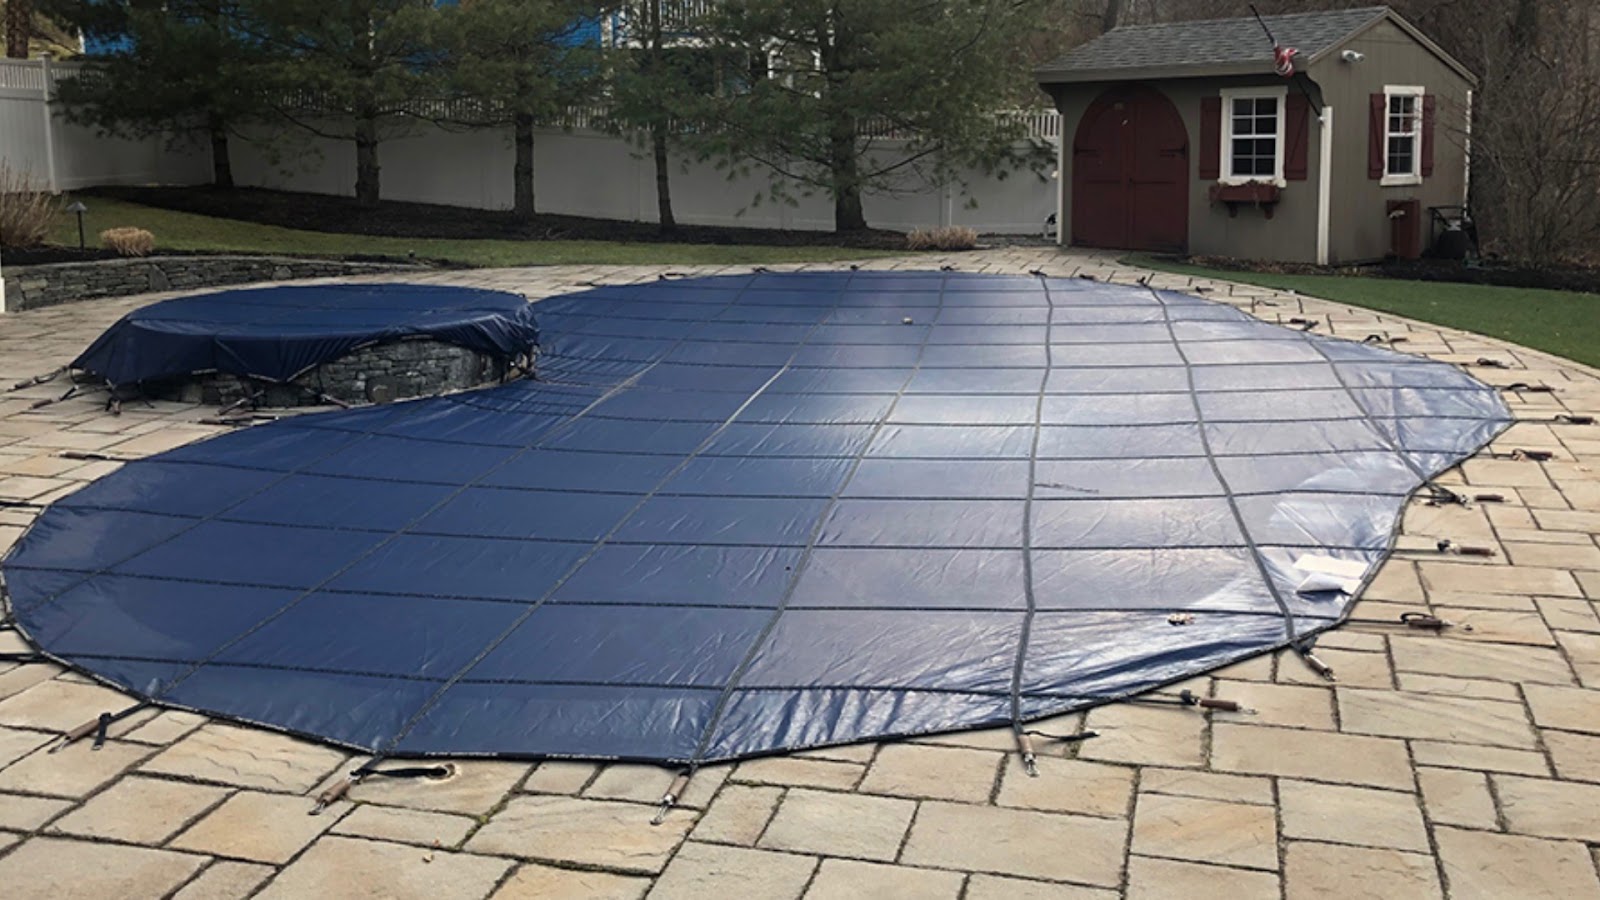 Securely Cover Your Pool for the Winter Season